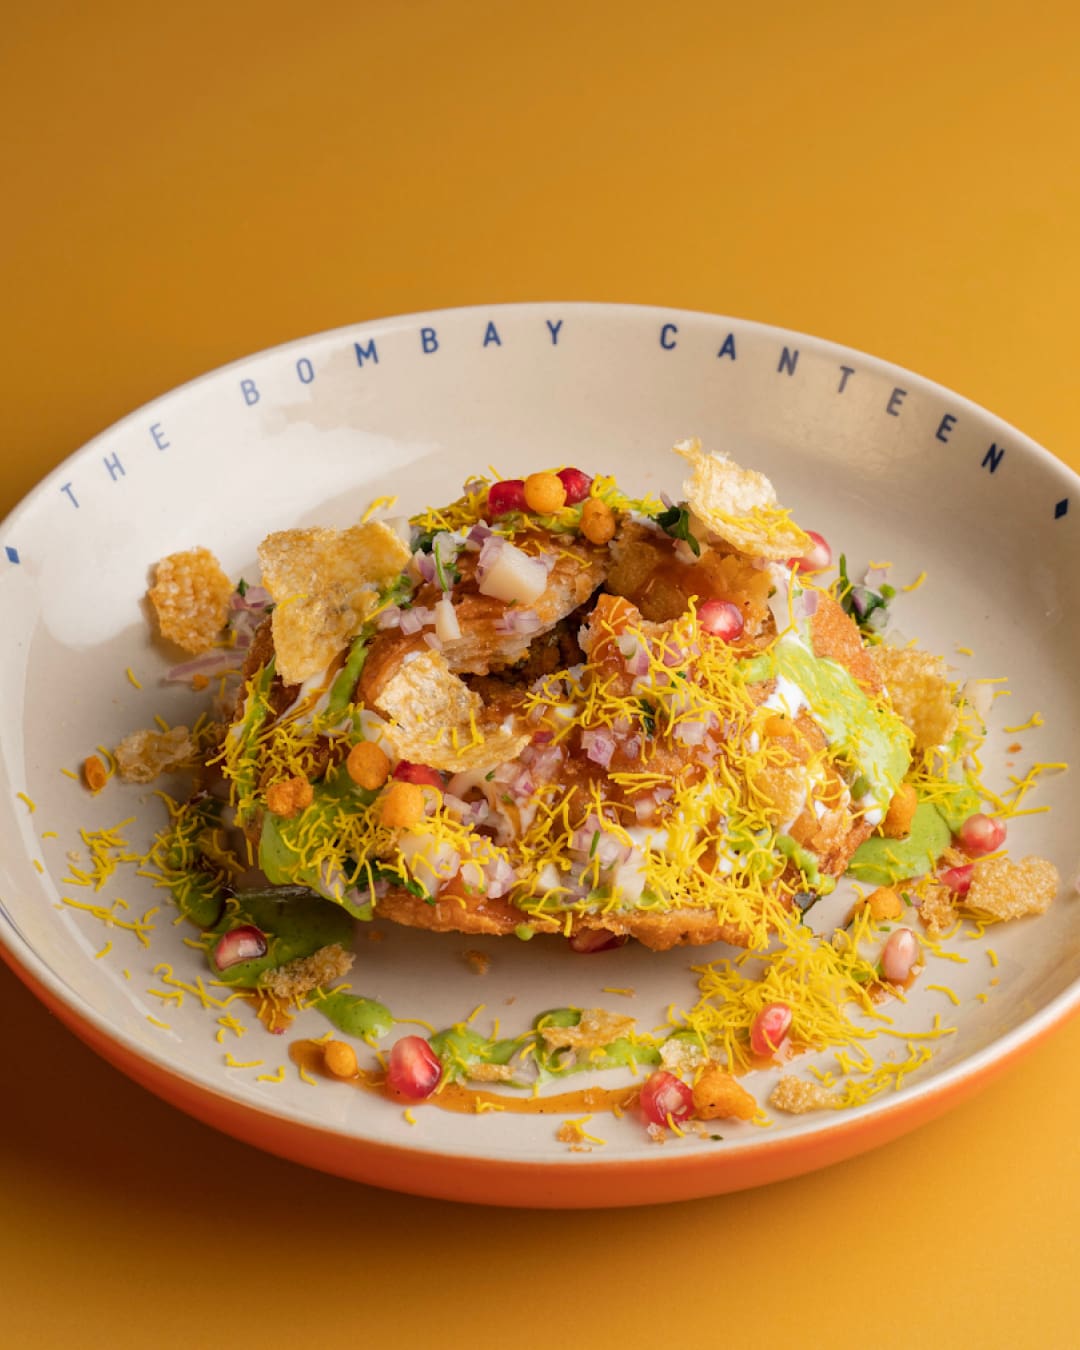 A dish from The Bombay Canteen